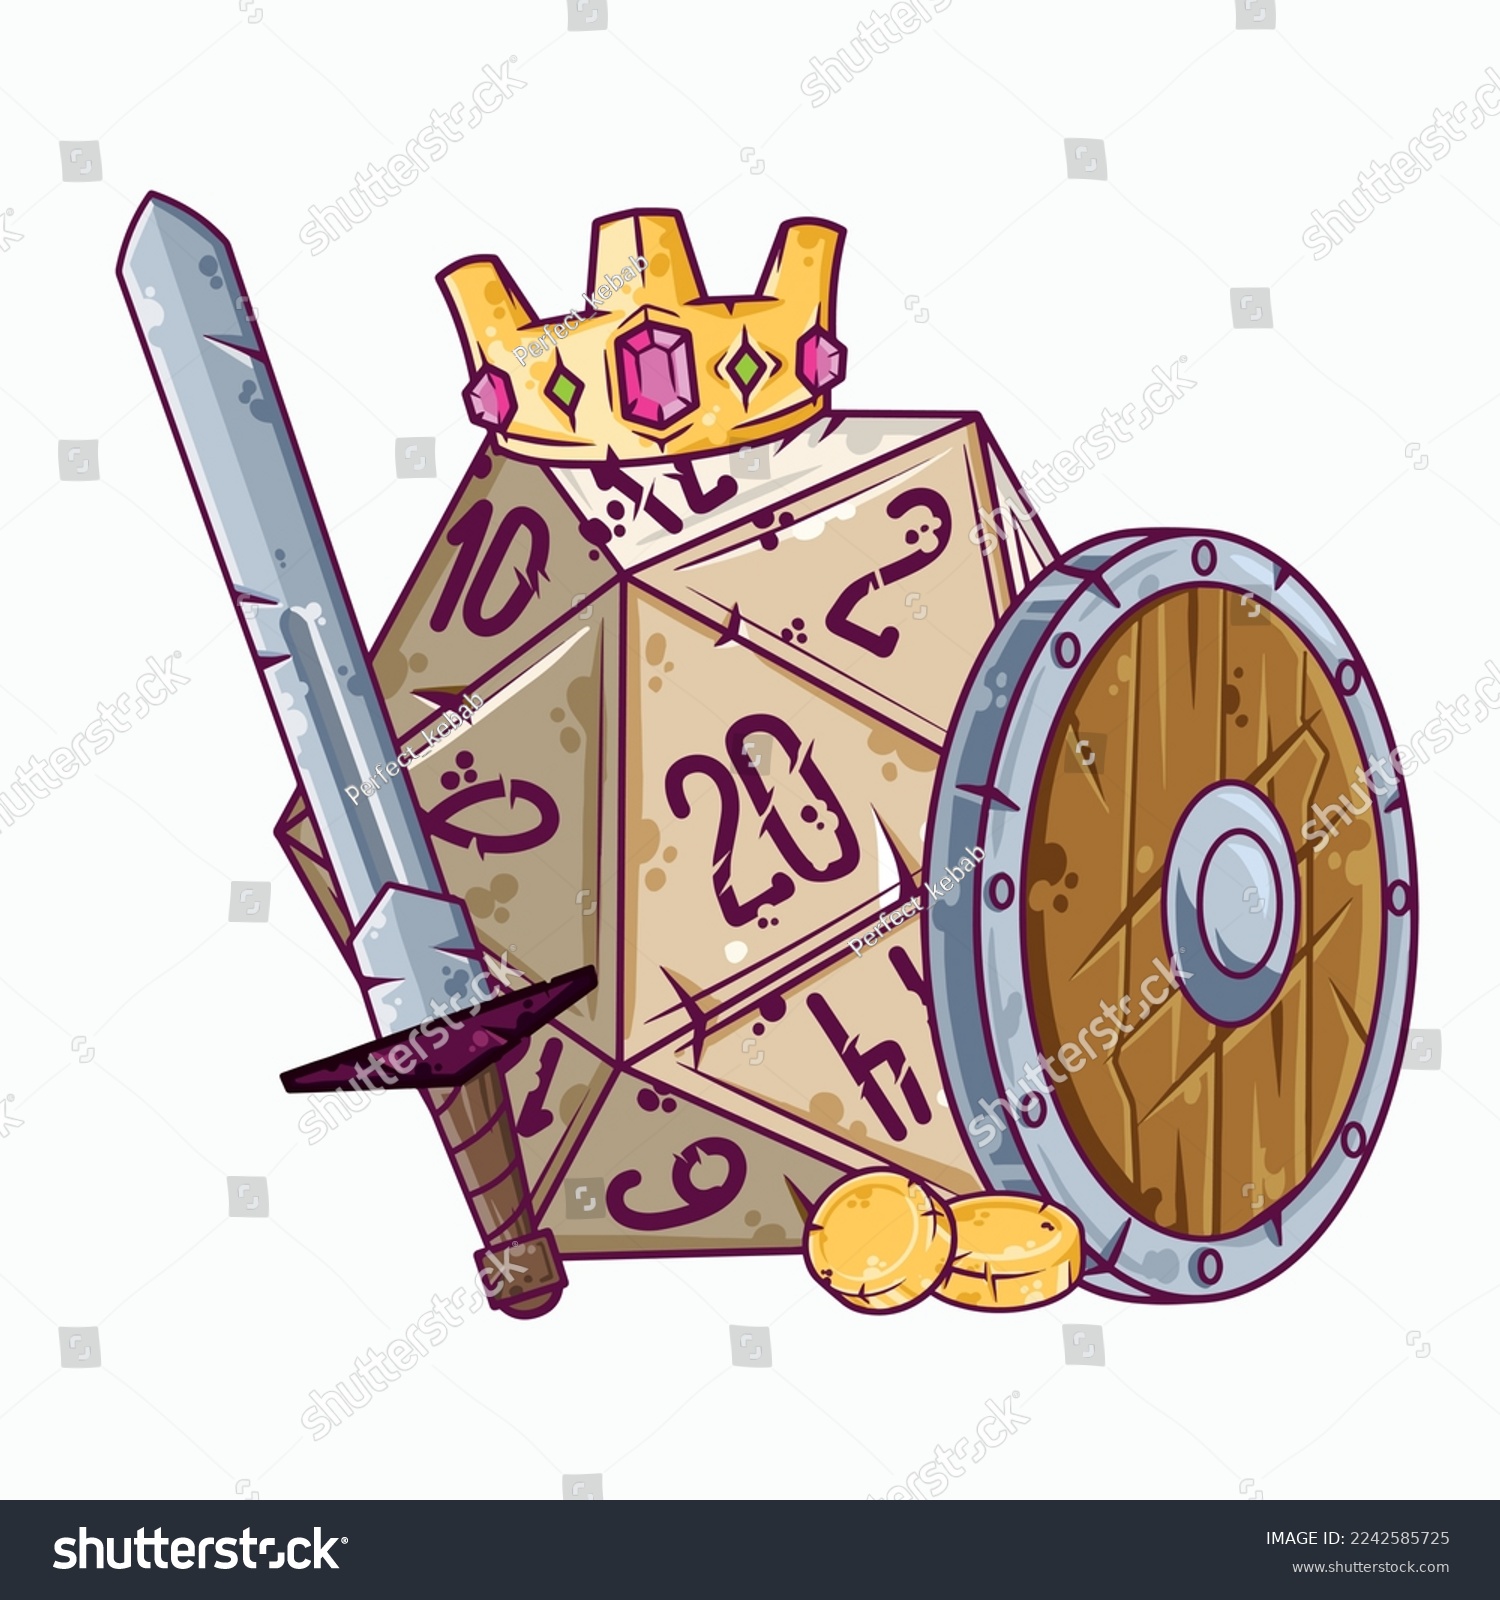 SVG of Dice d20 for playing Dnd. Dungeon and dragons board game. Treasures, paladin sword. Cartoon outline drawn illustration svg